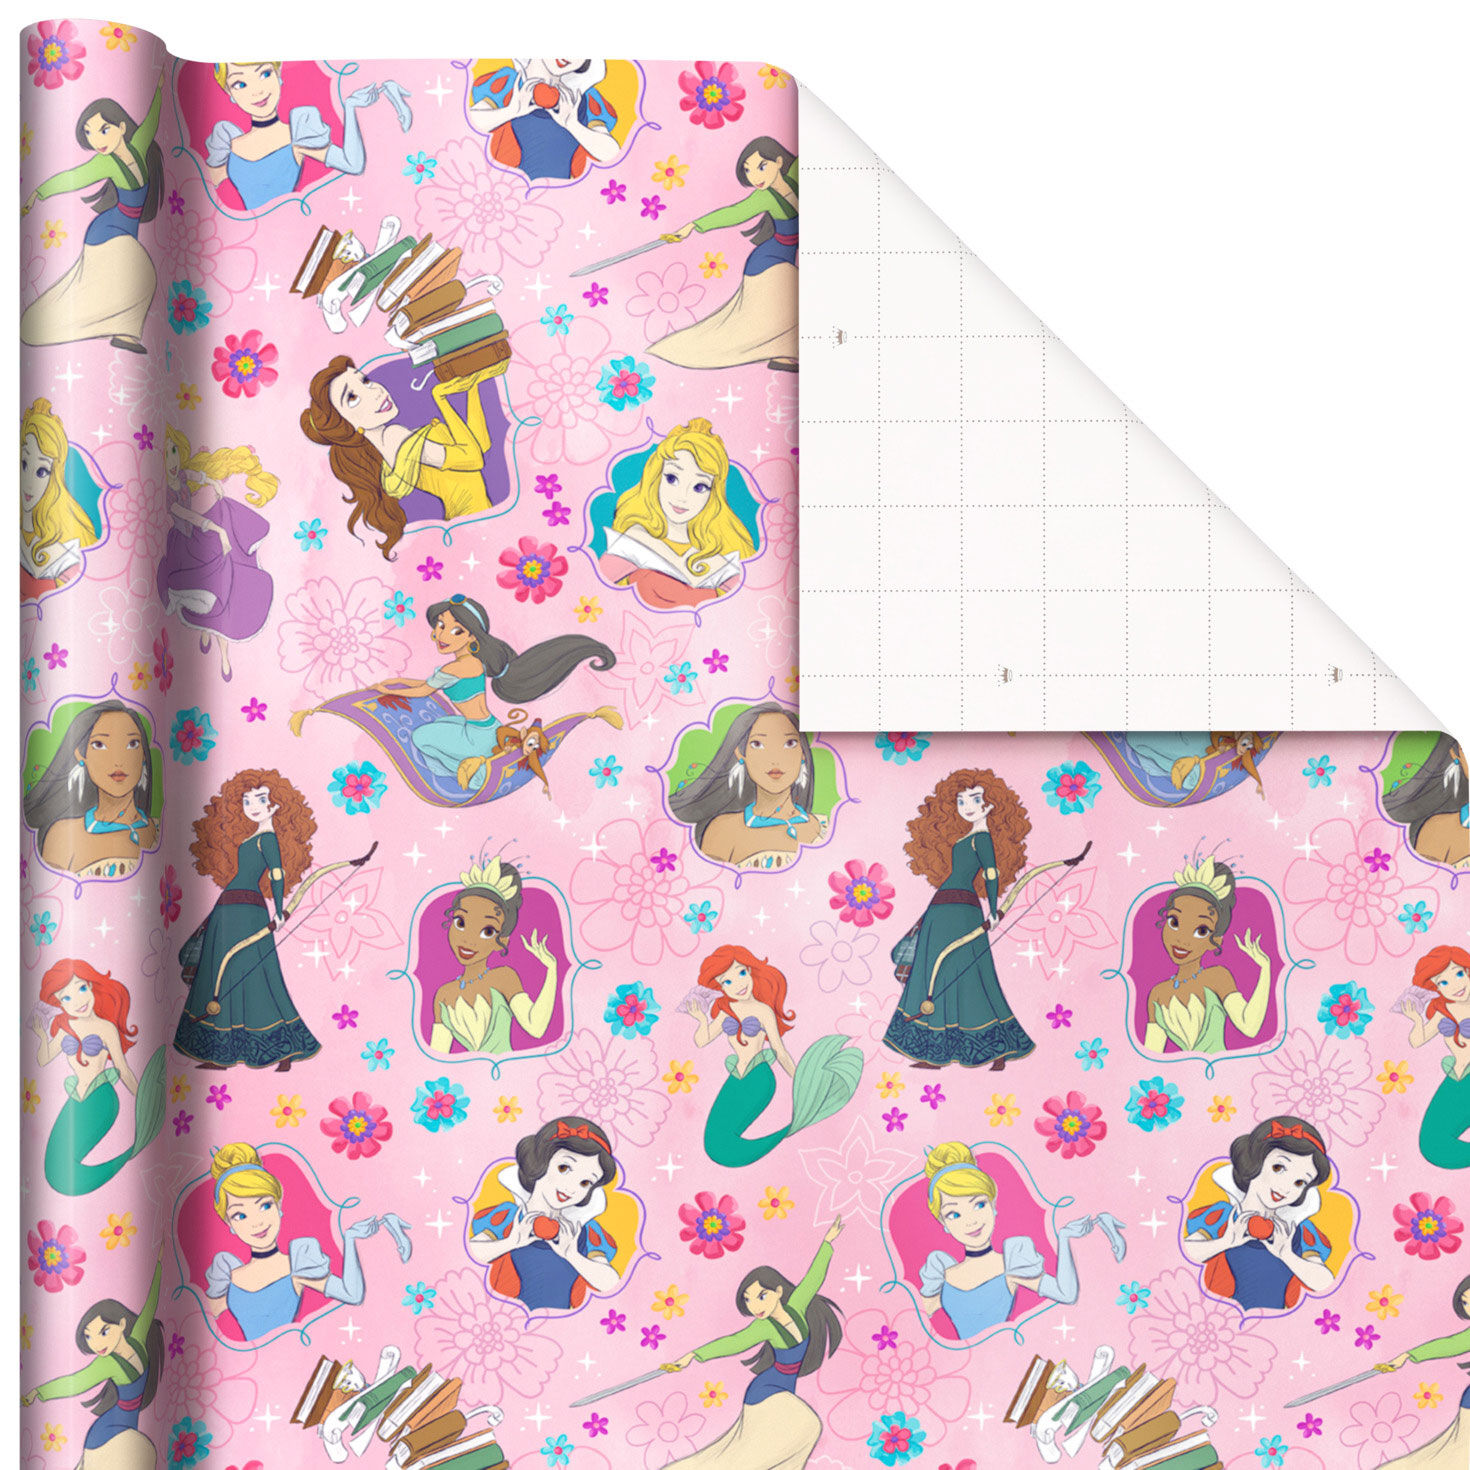 Disney Princesses on Pink Wrapping Paper, 17.5 sq. ft. for only USD 4.99 | Hallmark